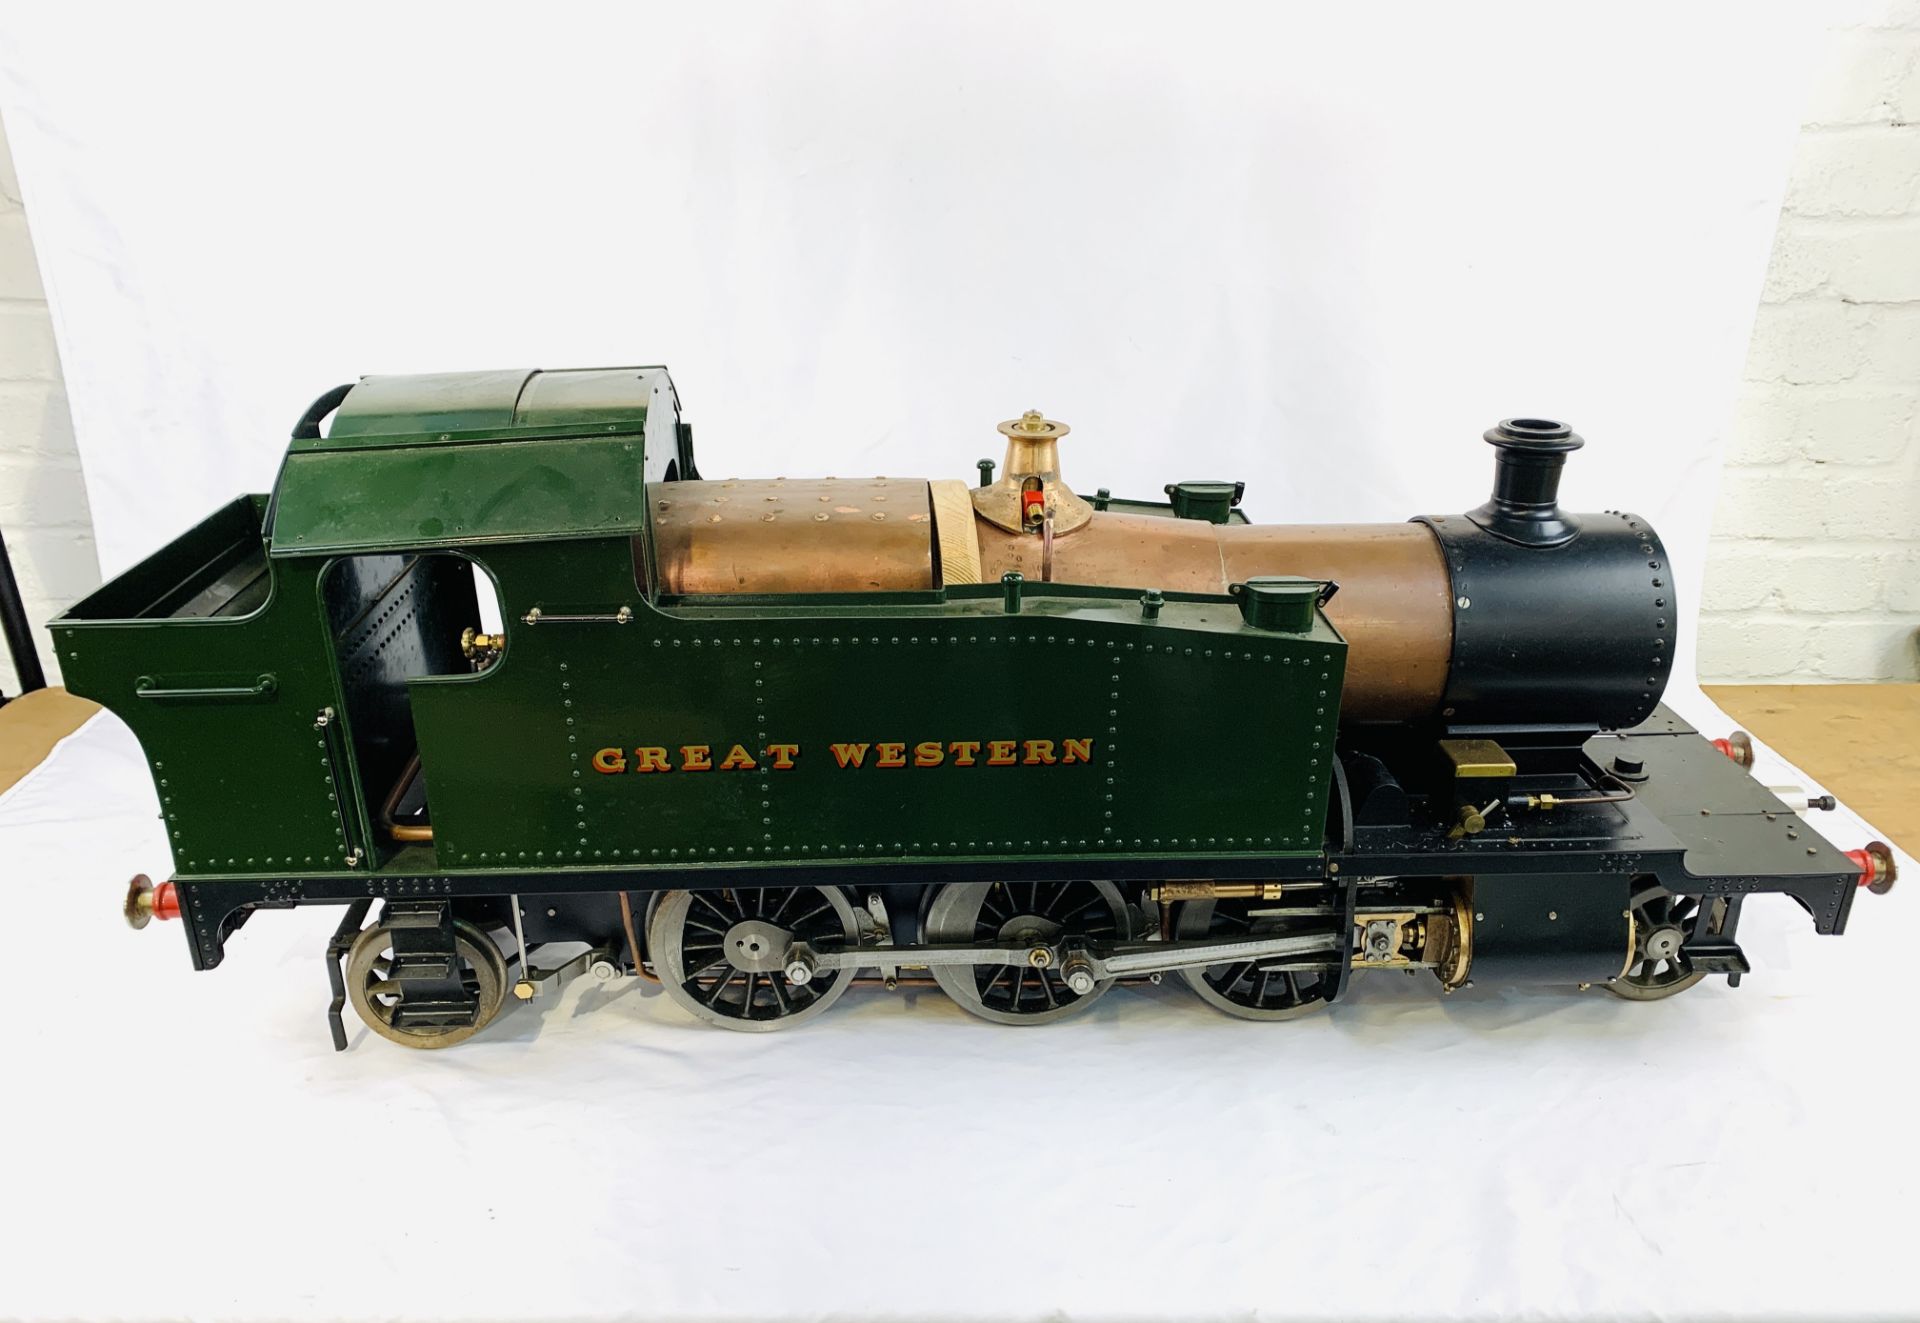 Great Western 2-6-2 5" gauge tank locomotive, together with a quantity of parts and plans